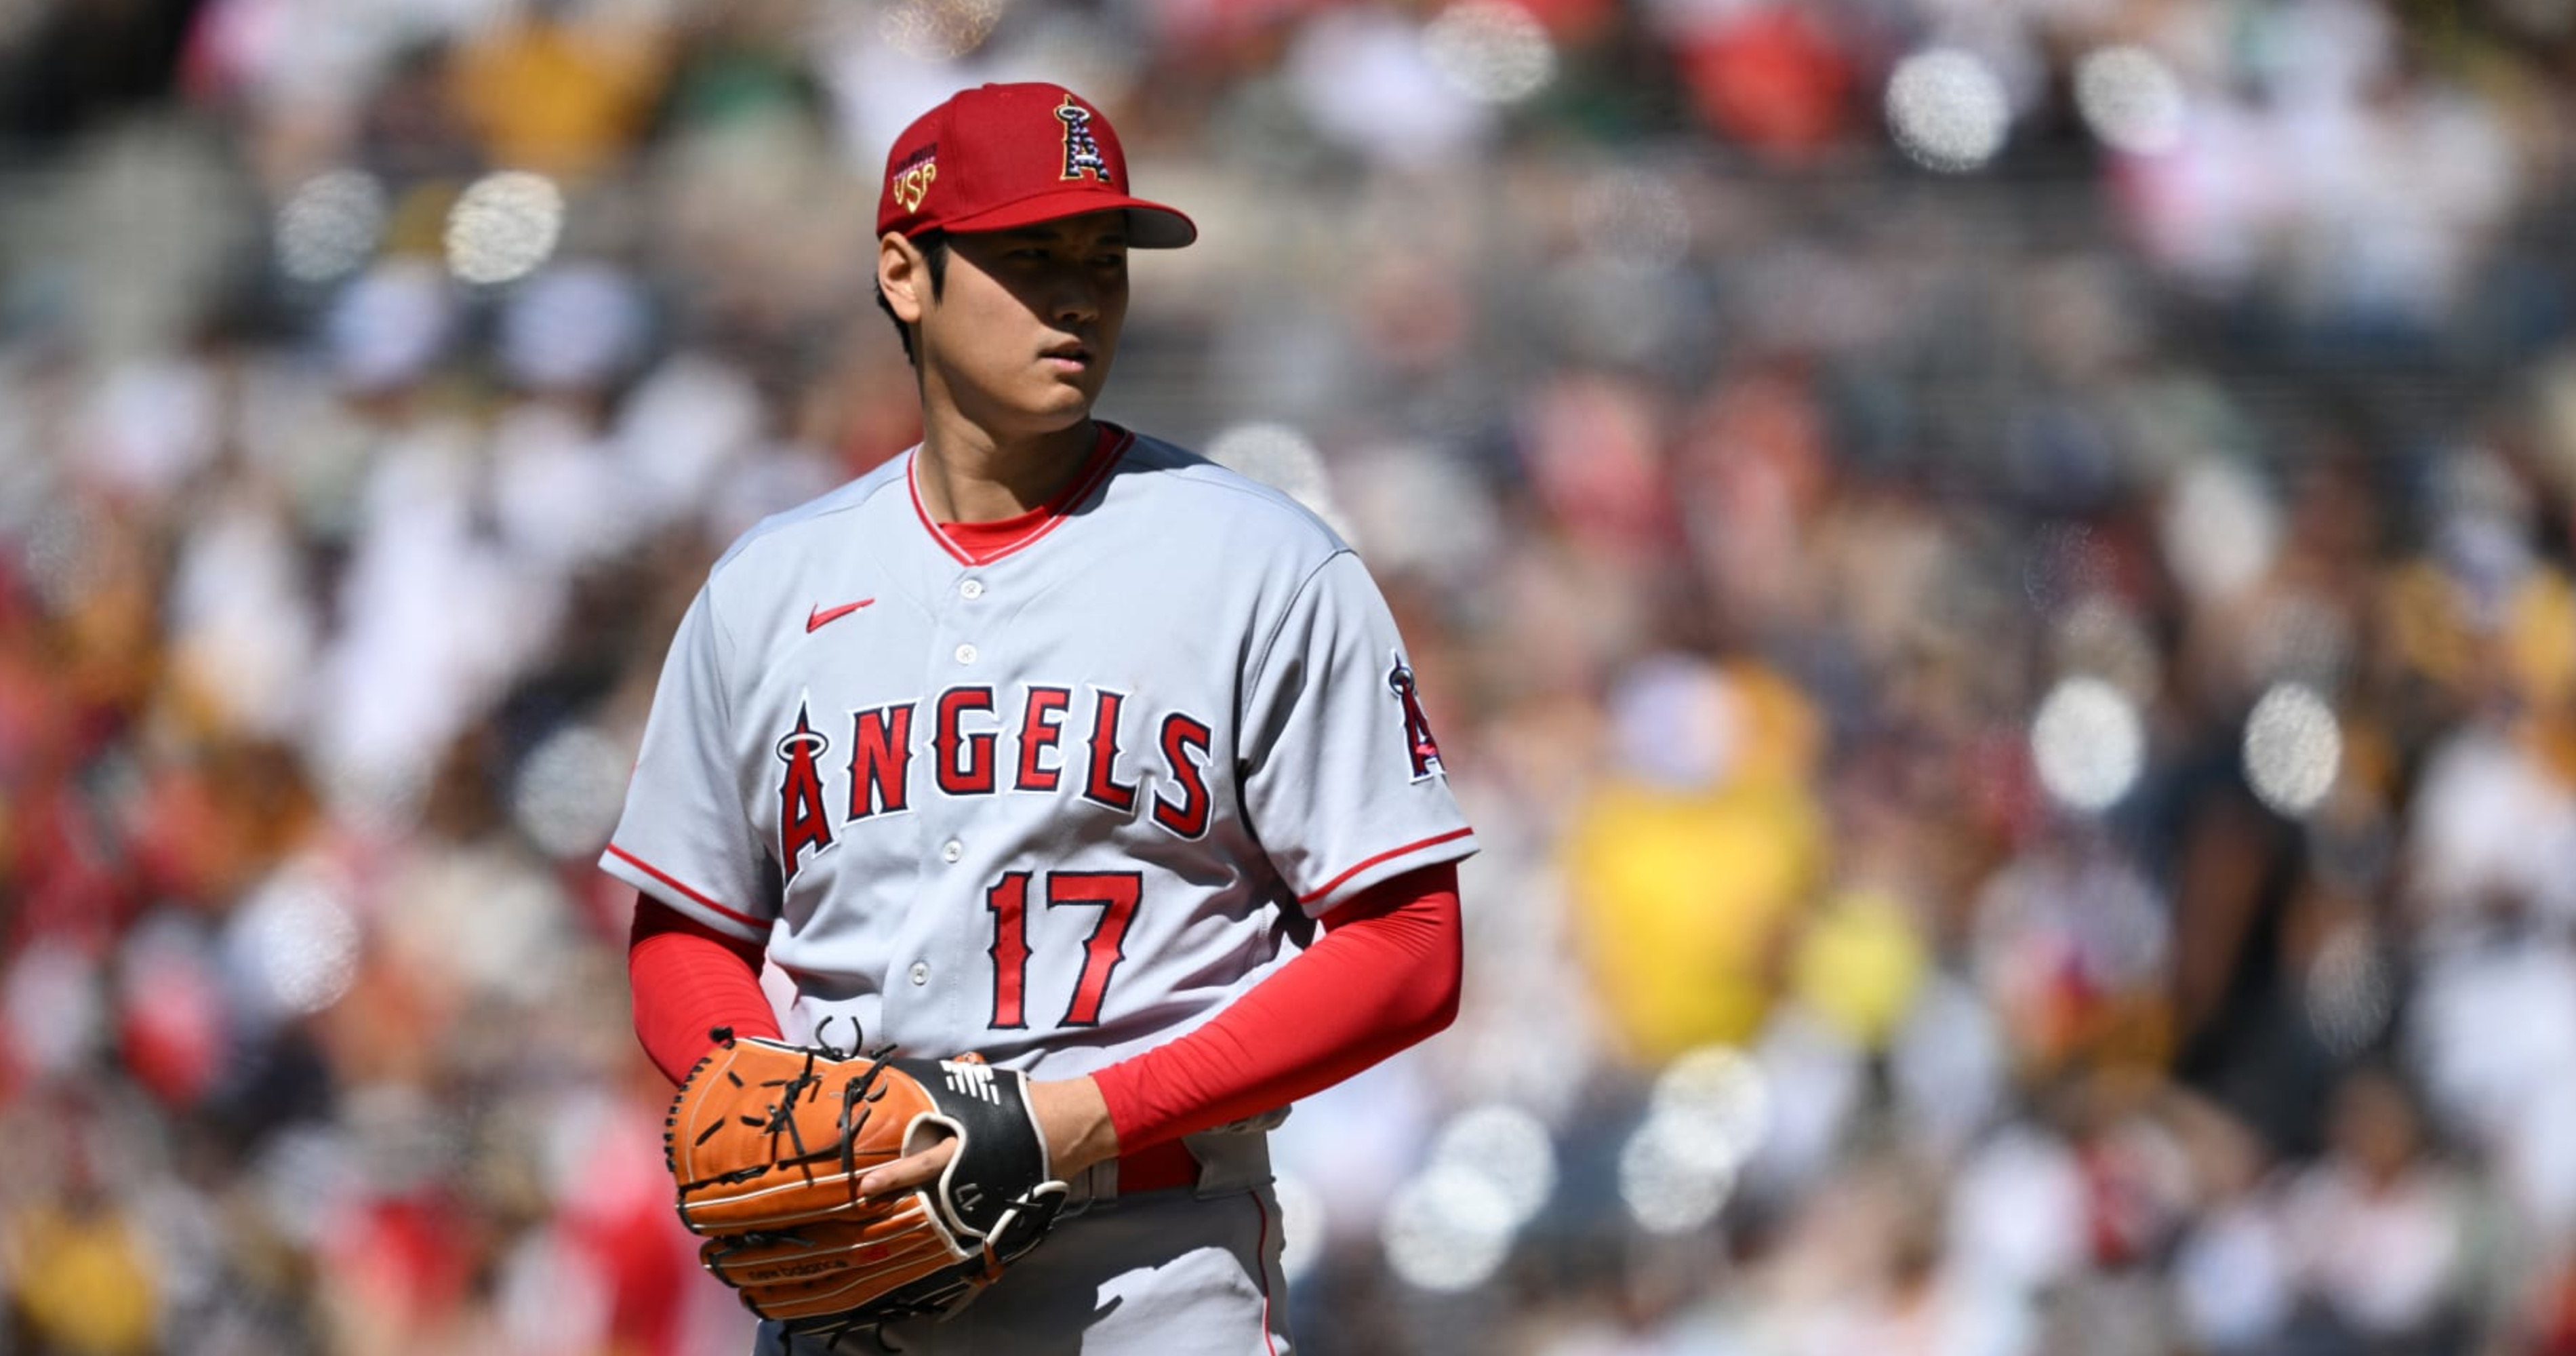 MLB rumors: Shohei Ohtani trade not completely ruled out by Angels